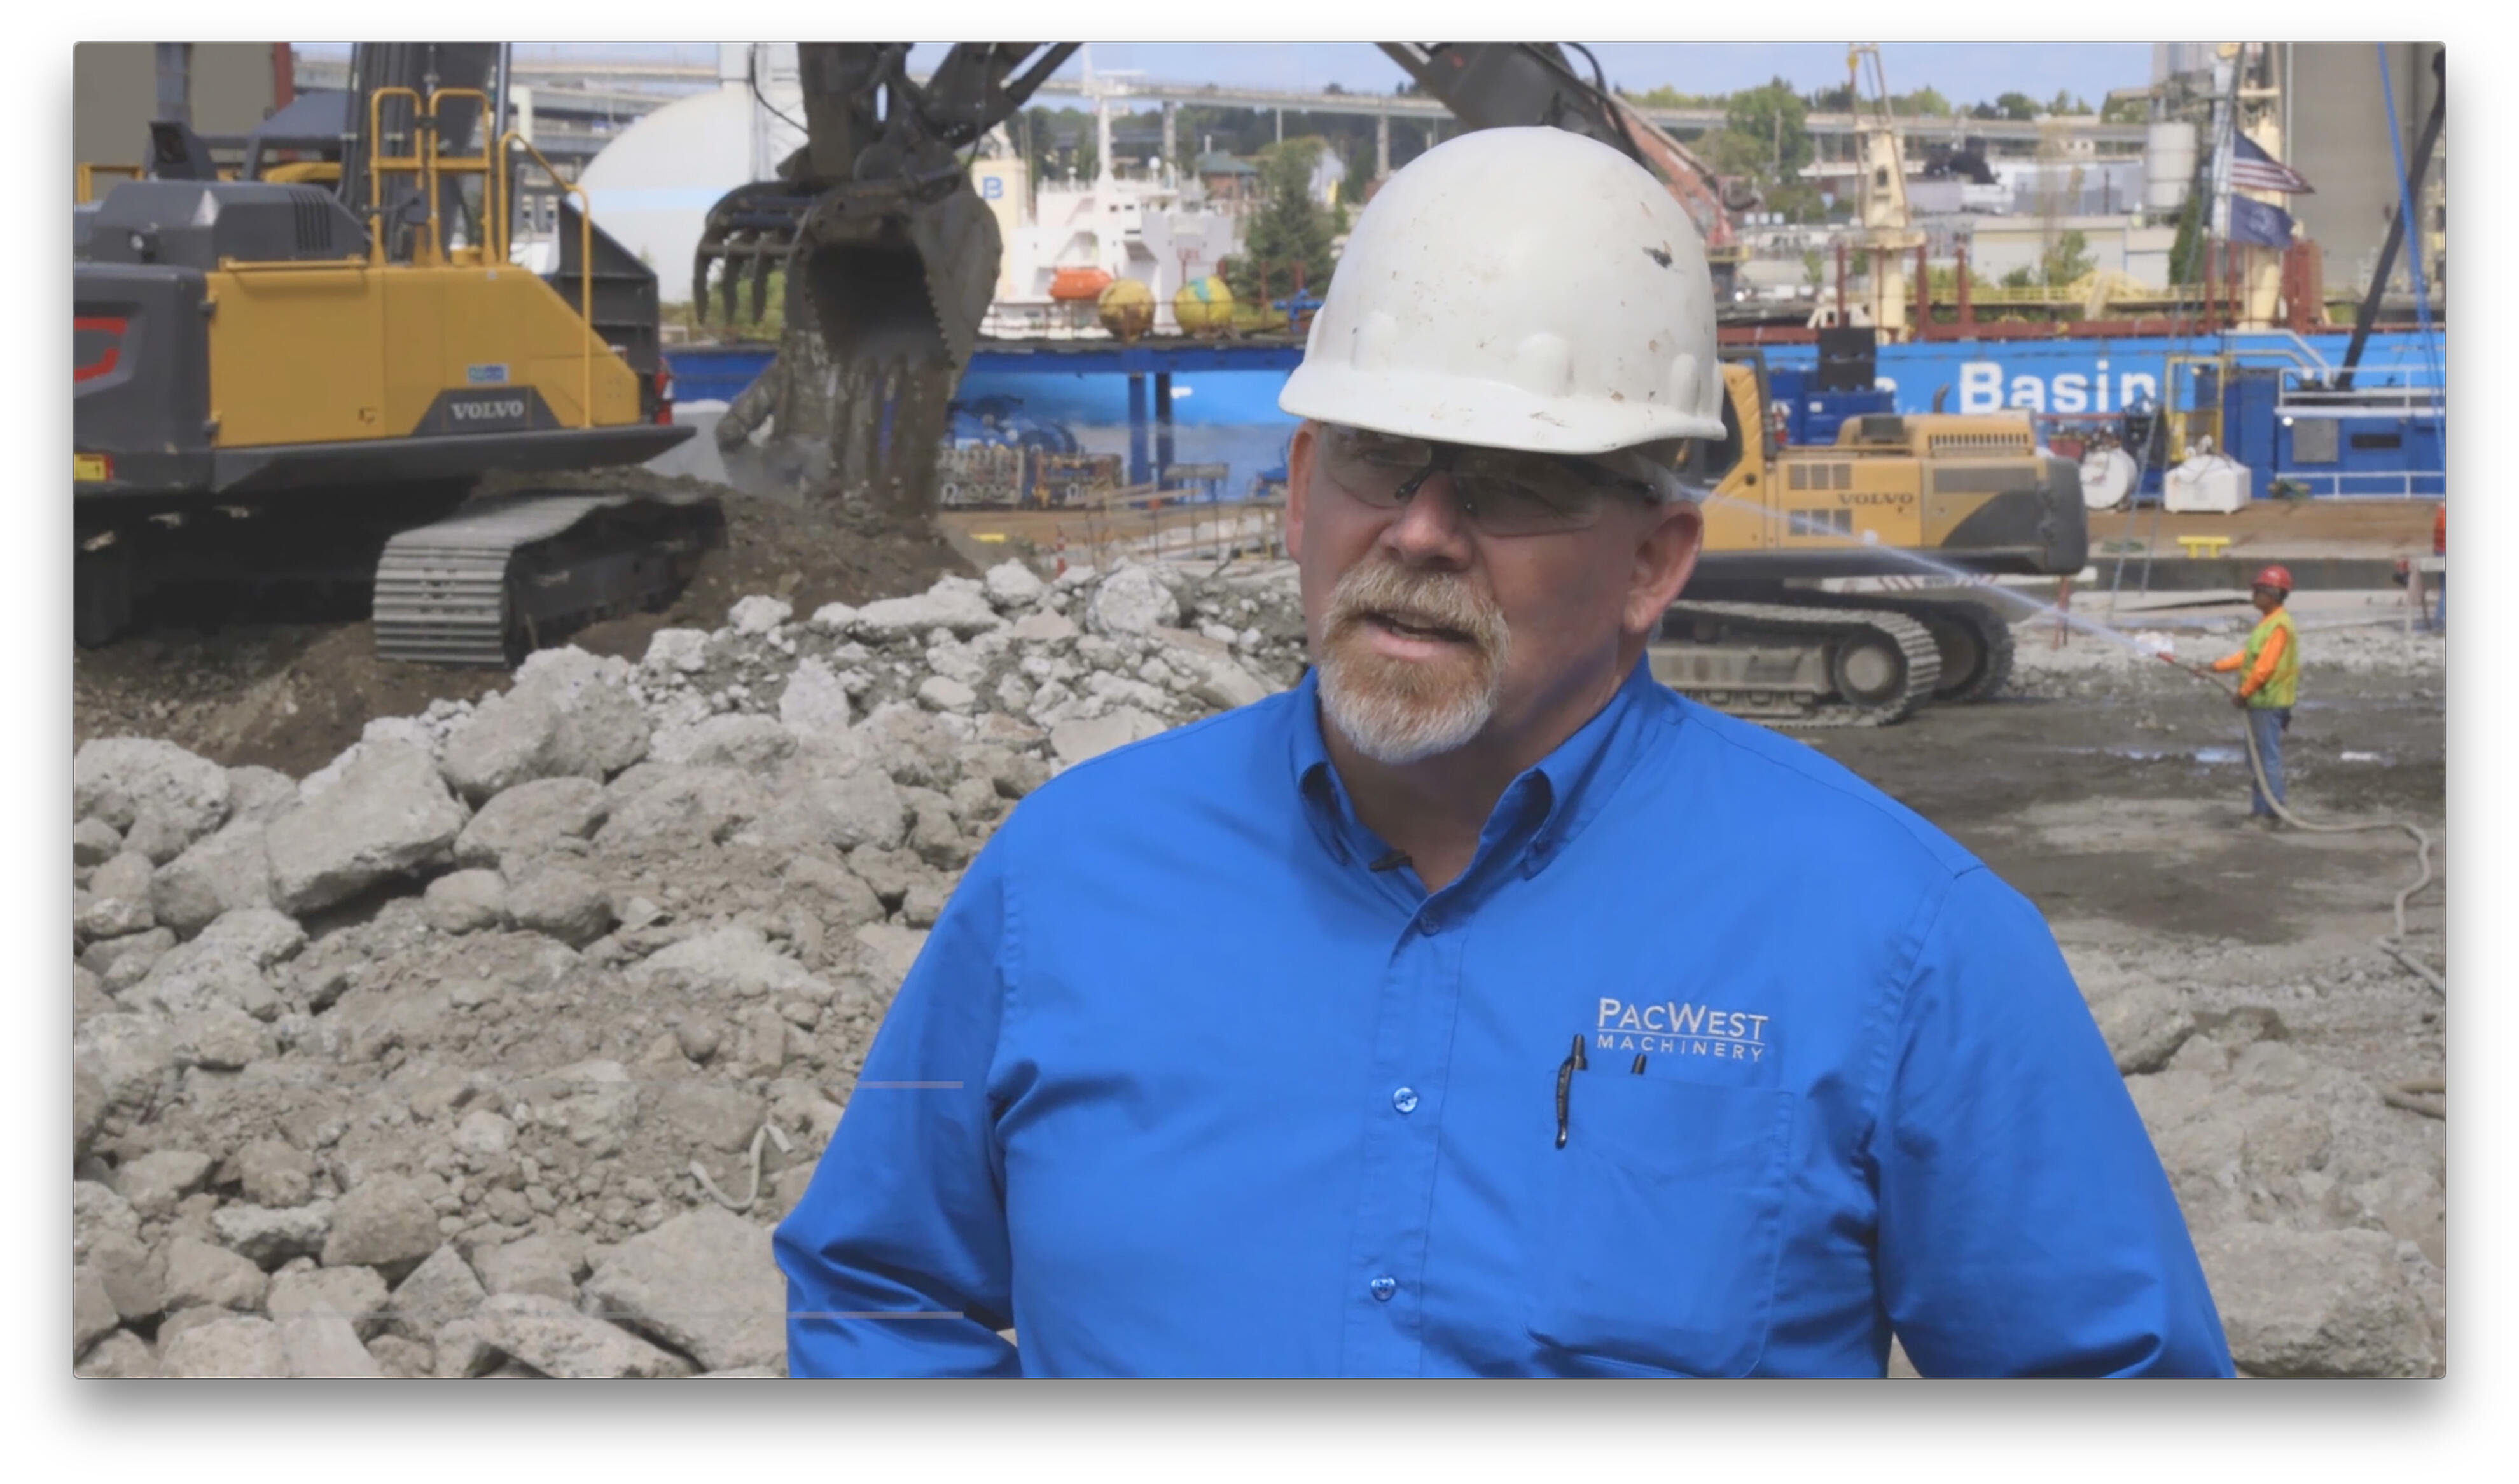 Ed Kanable, a sales representative for PacWest, works with Northwest Demolition